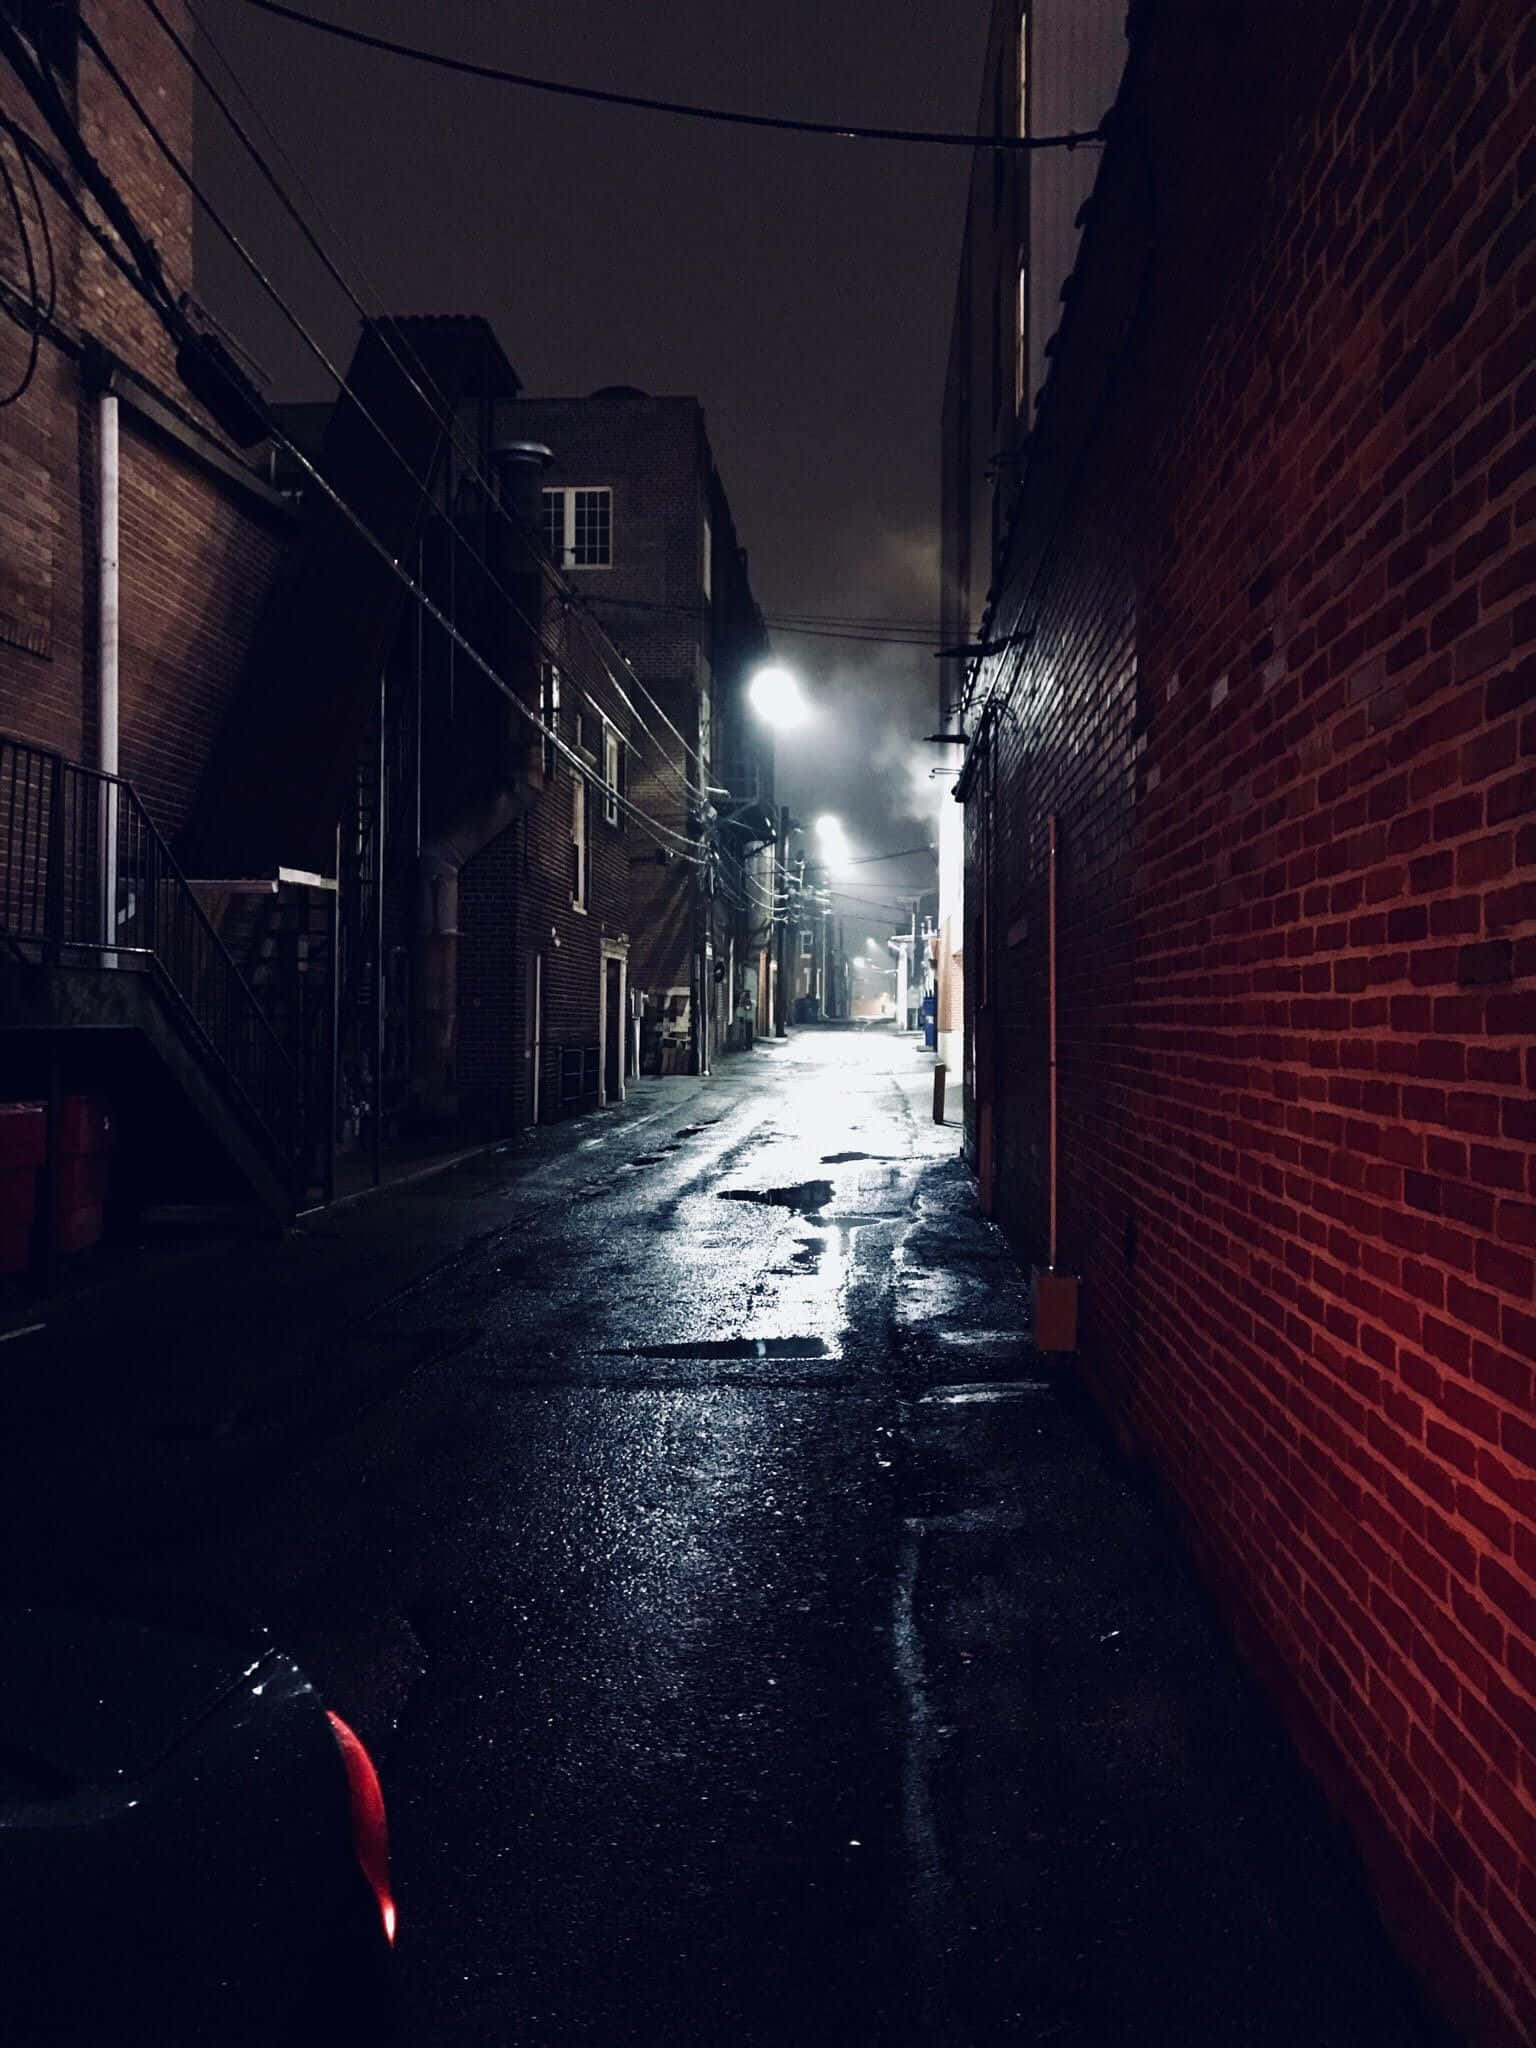 A Dark Alley With A Red Light